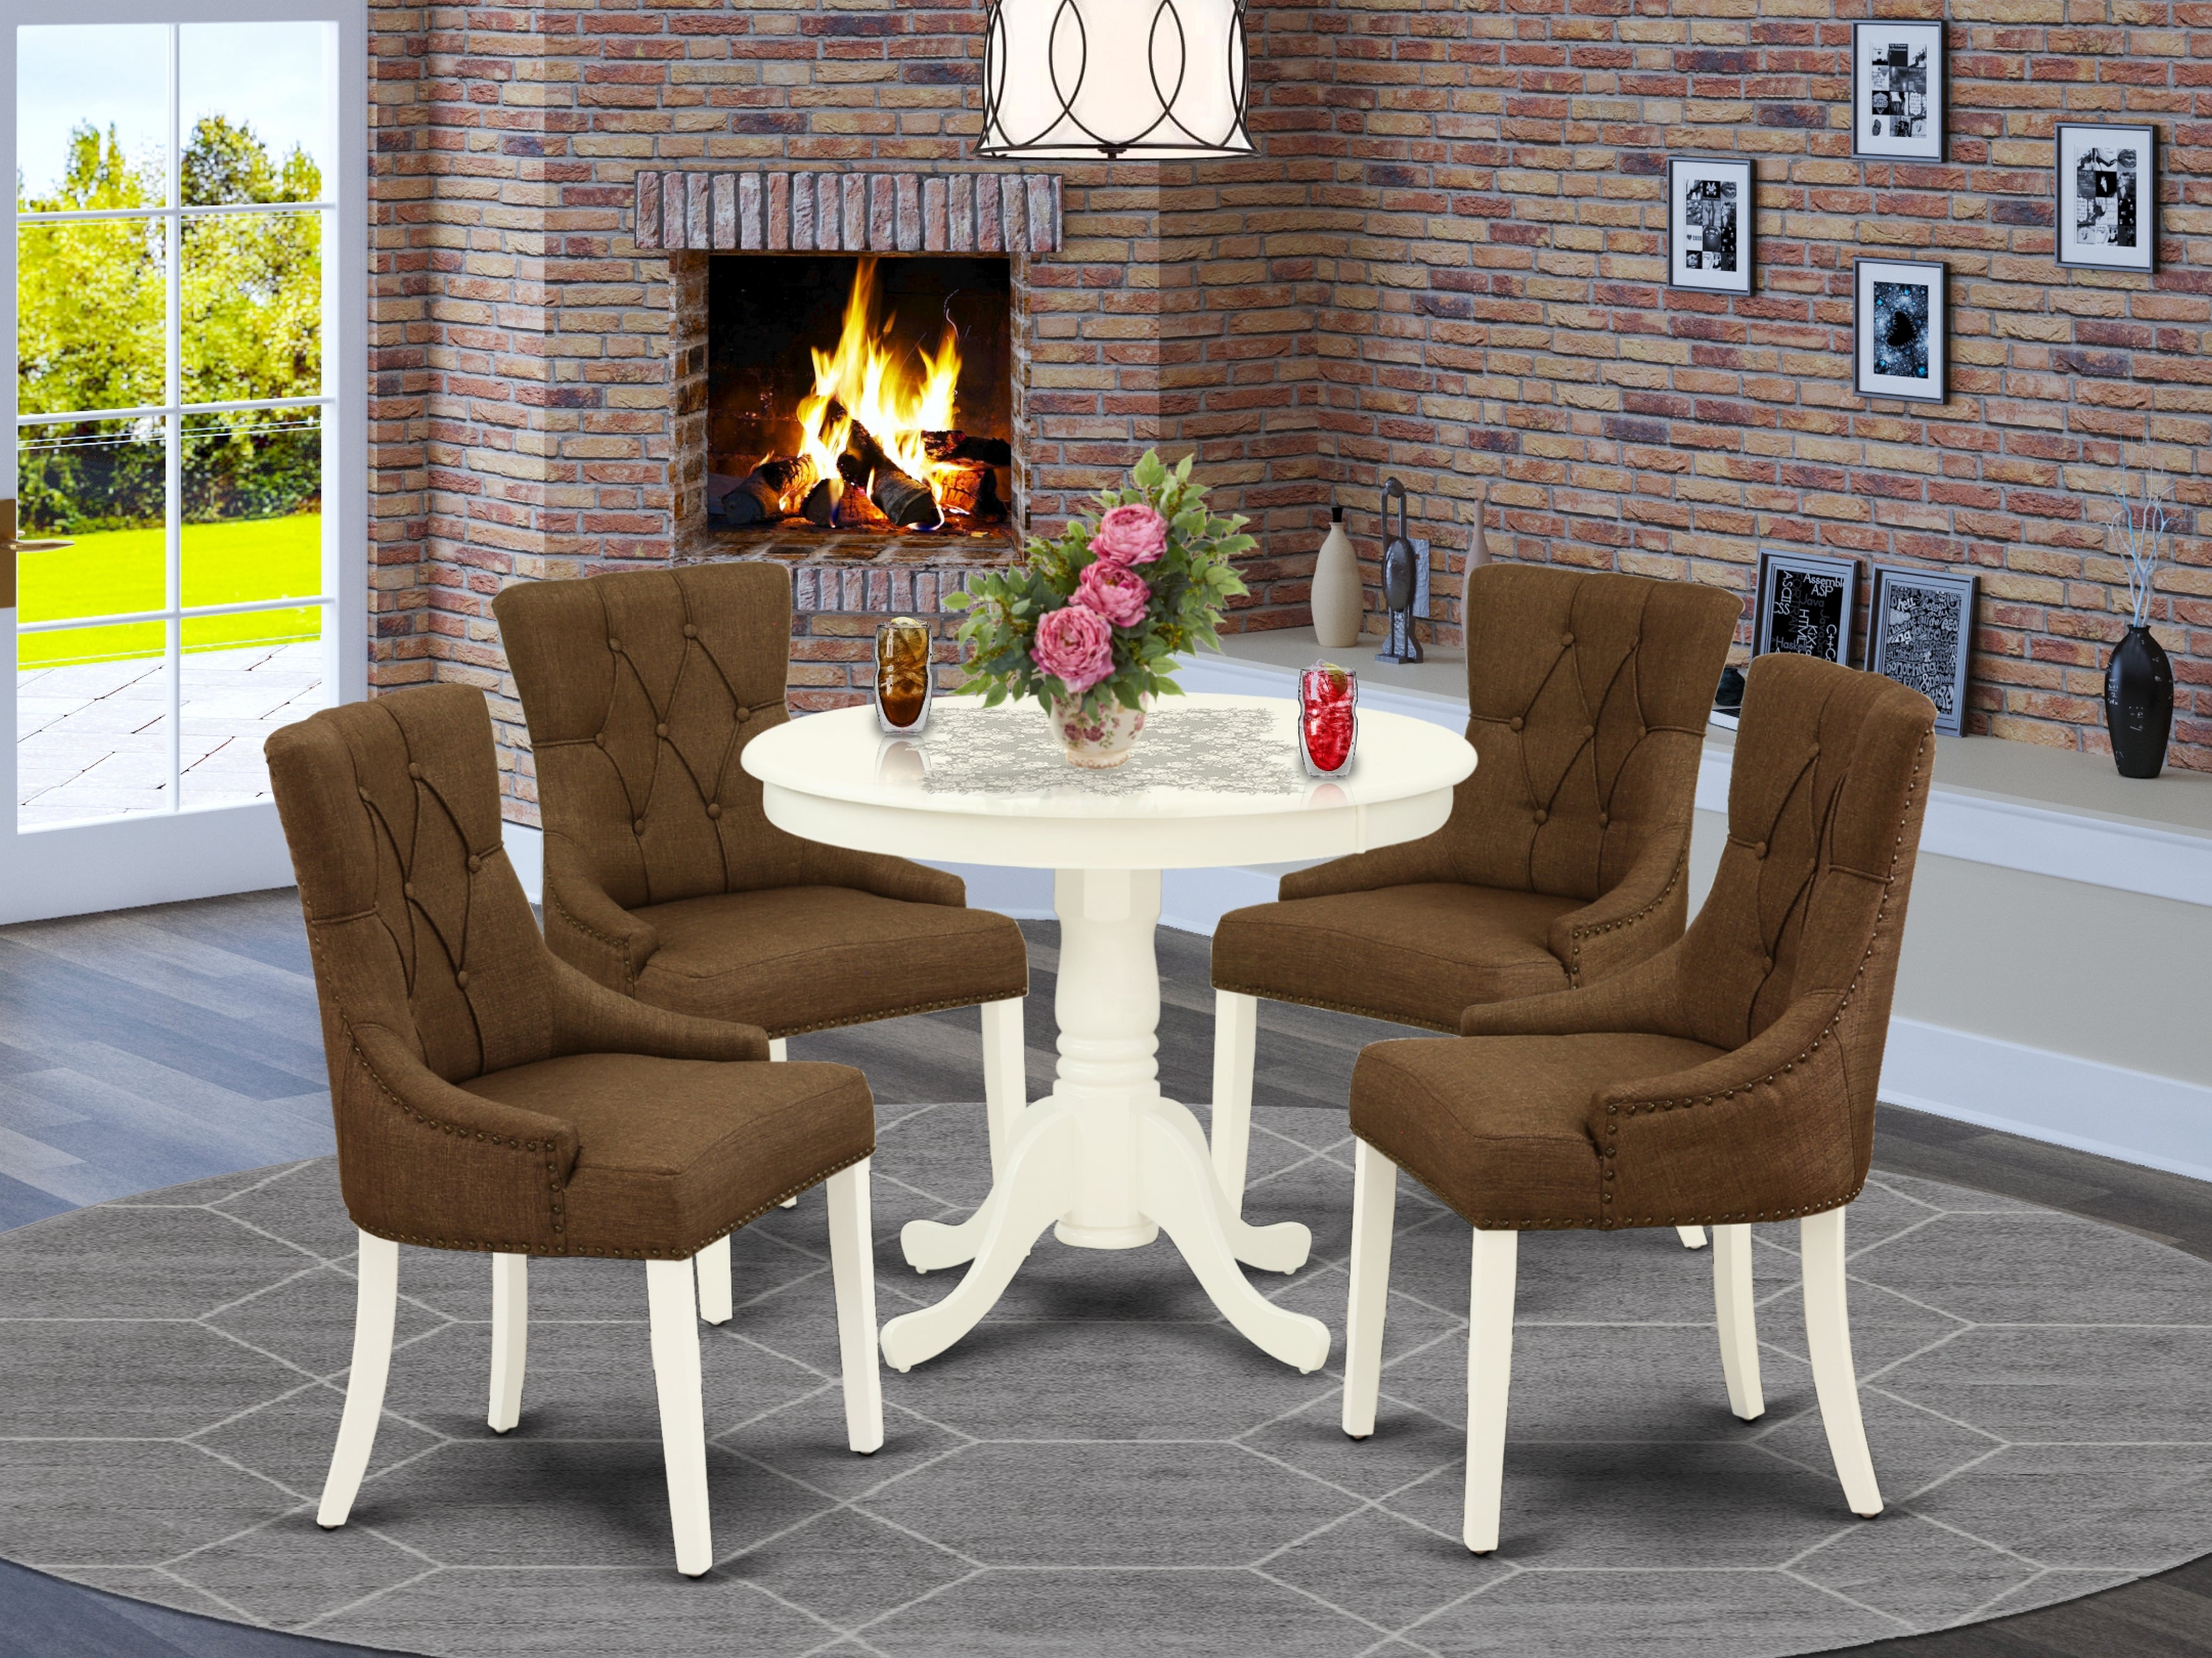 ANFR5-LWH-18 5Pc Dining Set Includes a Small Round Dinette Table and Four Parson Chairs with Dark Coffee Fabric, Linen White Finish